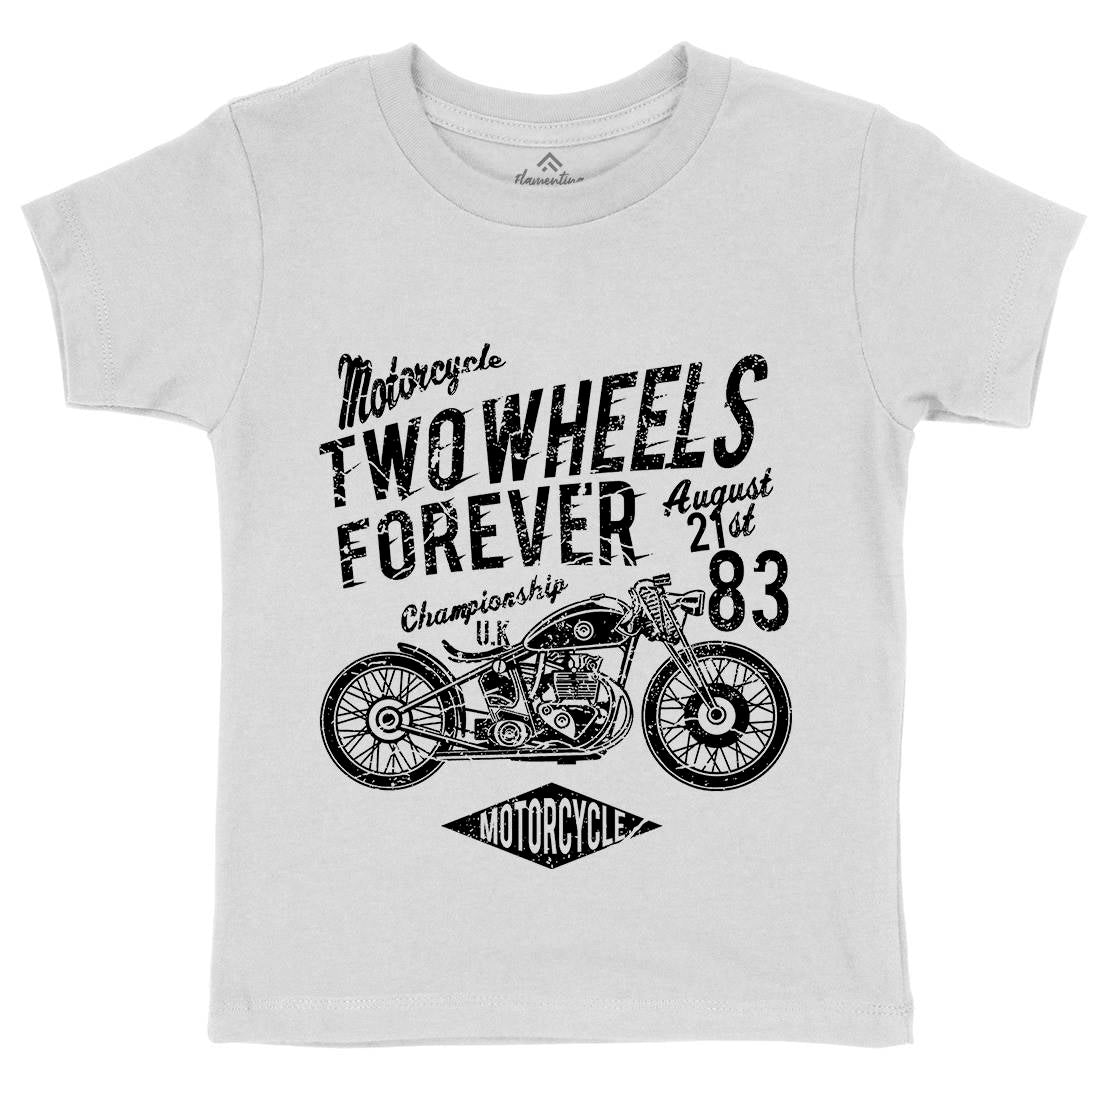 Two Wheels Forever Kids Crew Neck T-Shirt Motorcycles A186